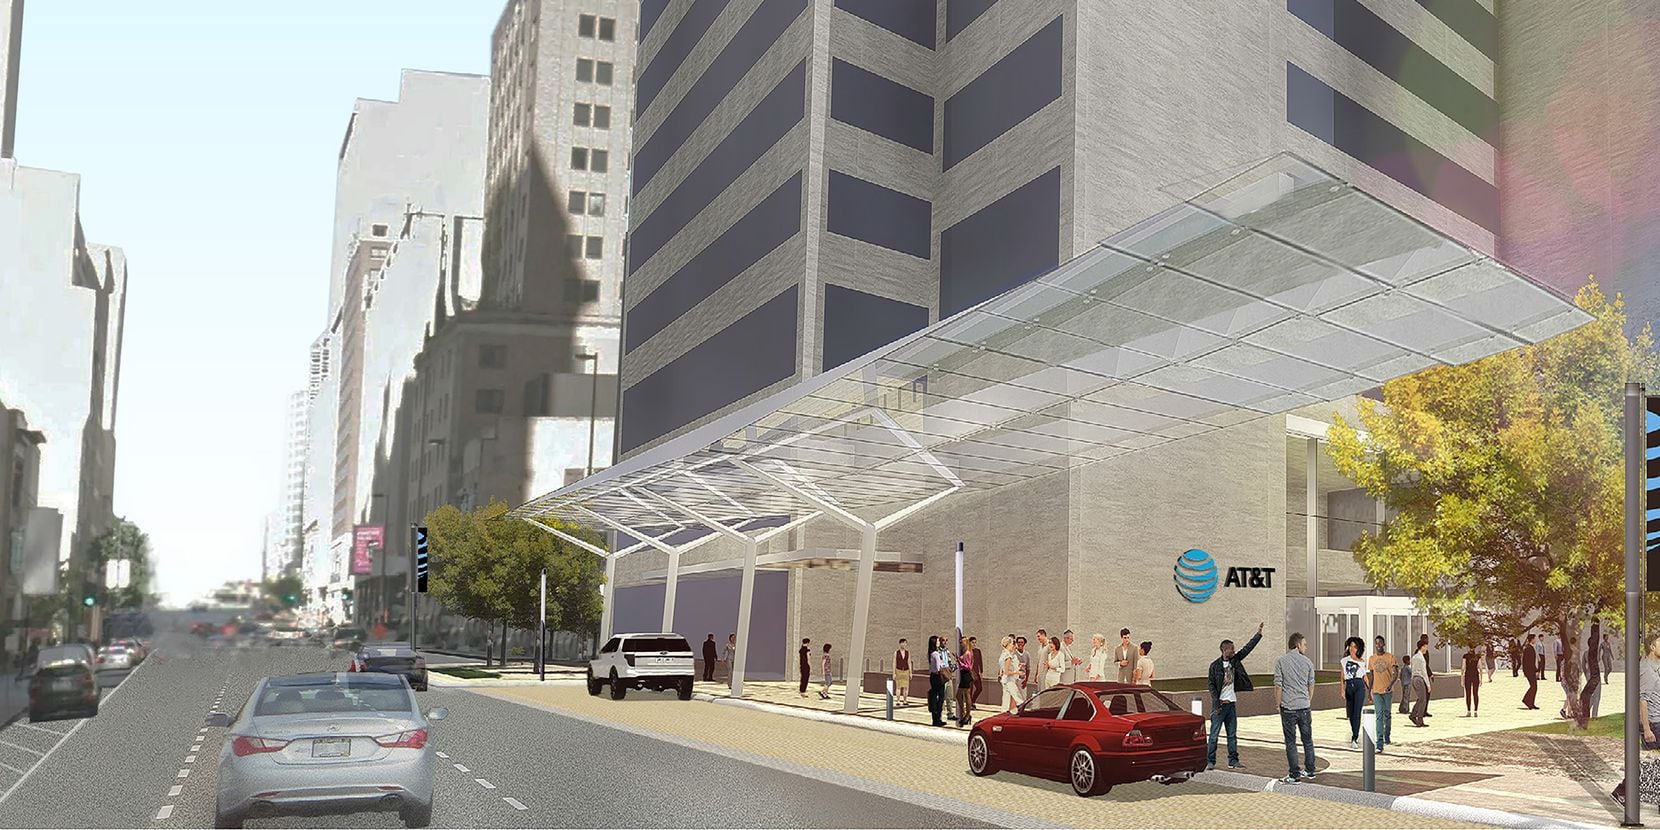 A new drop-off lane and canopy is planned along Commerce Street.